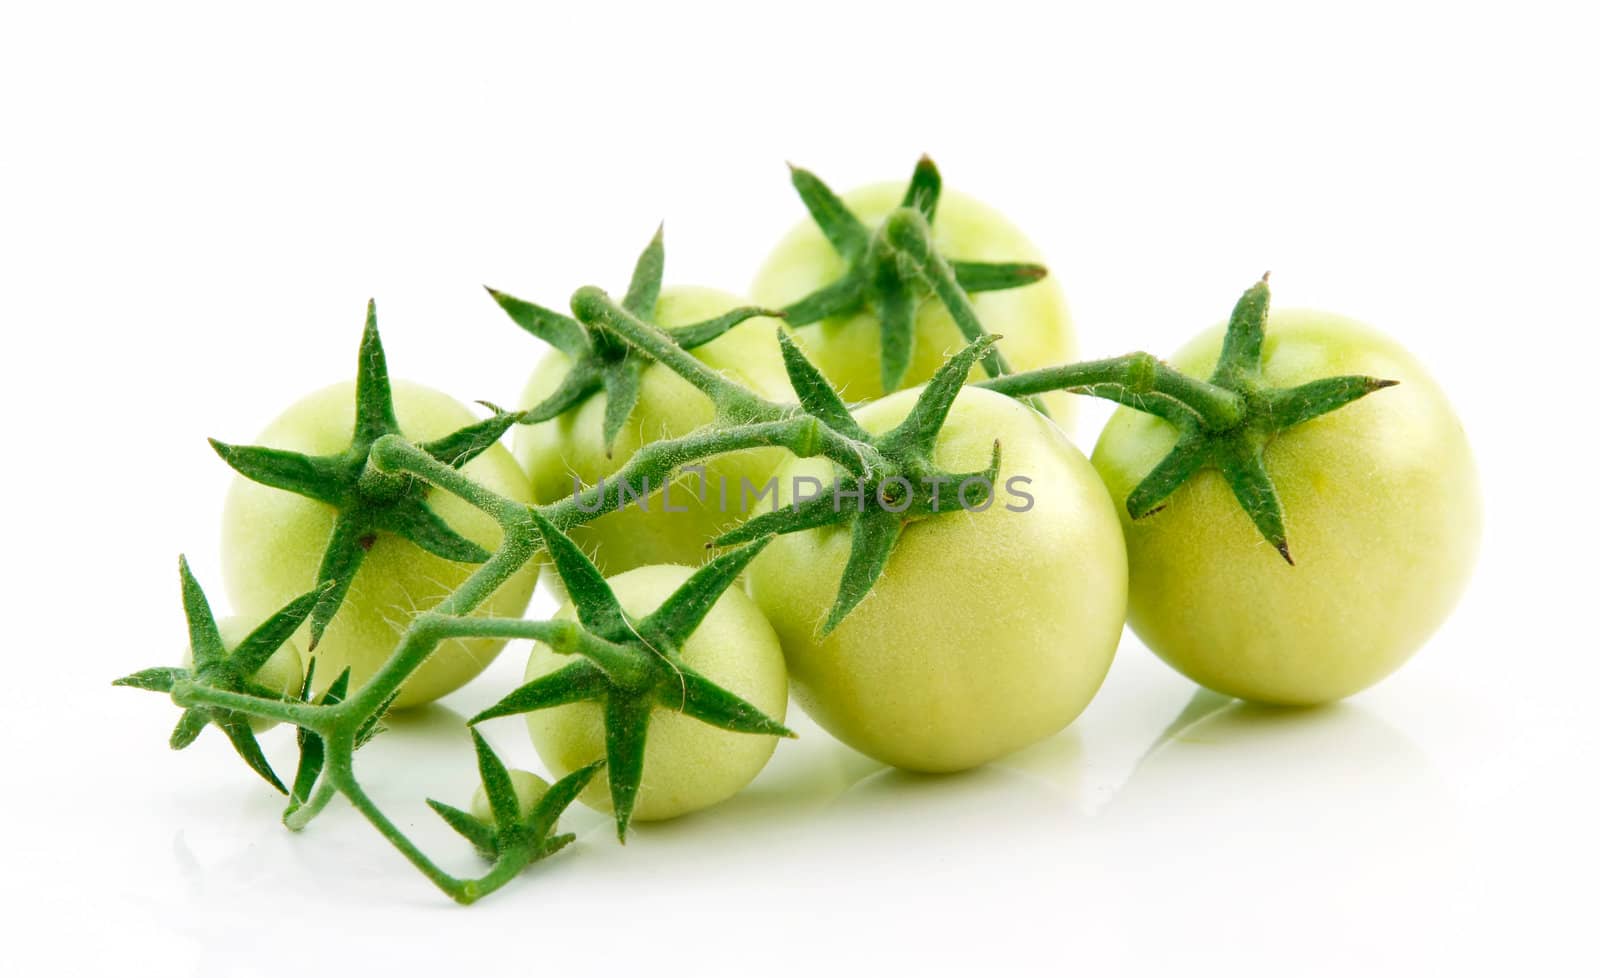 Bunch of Ripe Yellow Tomatoes Isolated on White Background